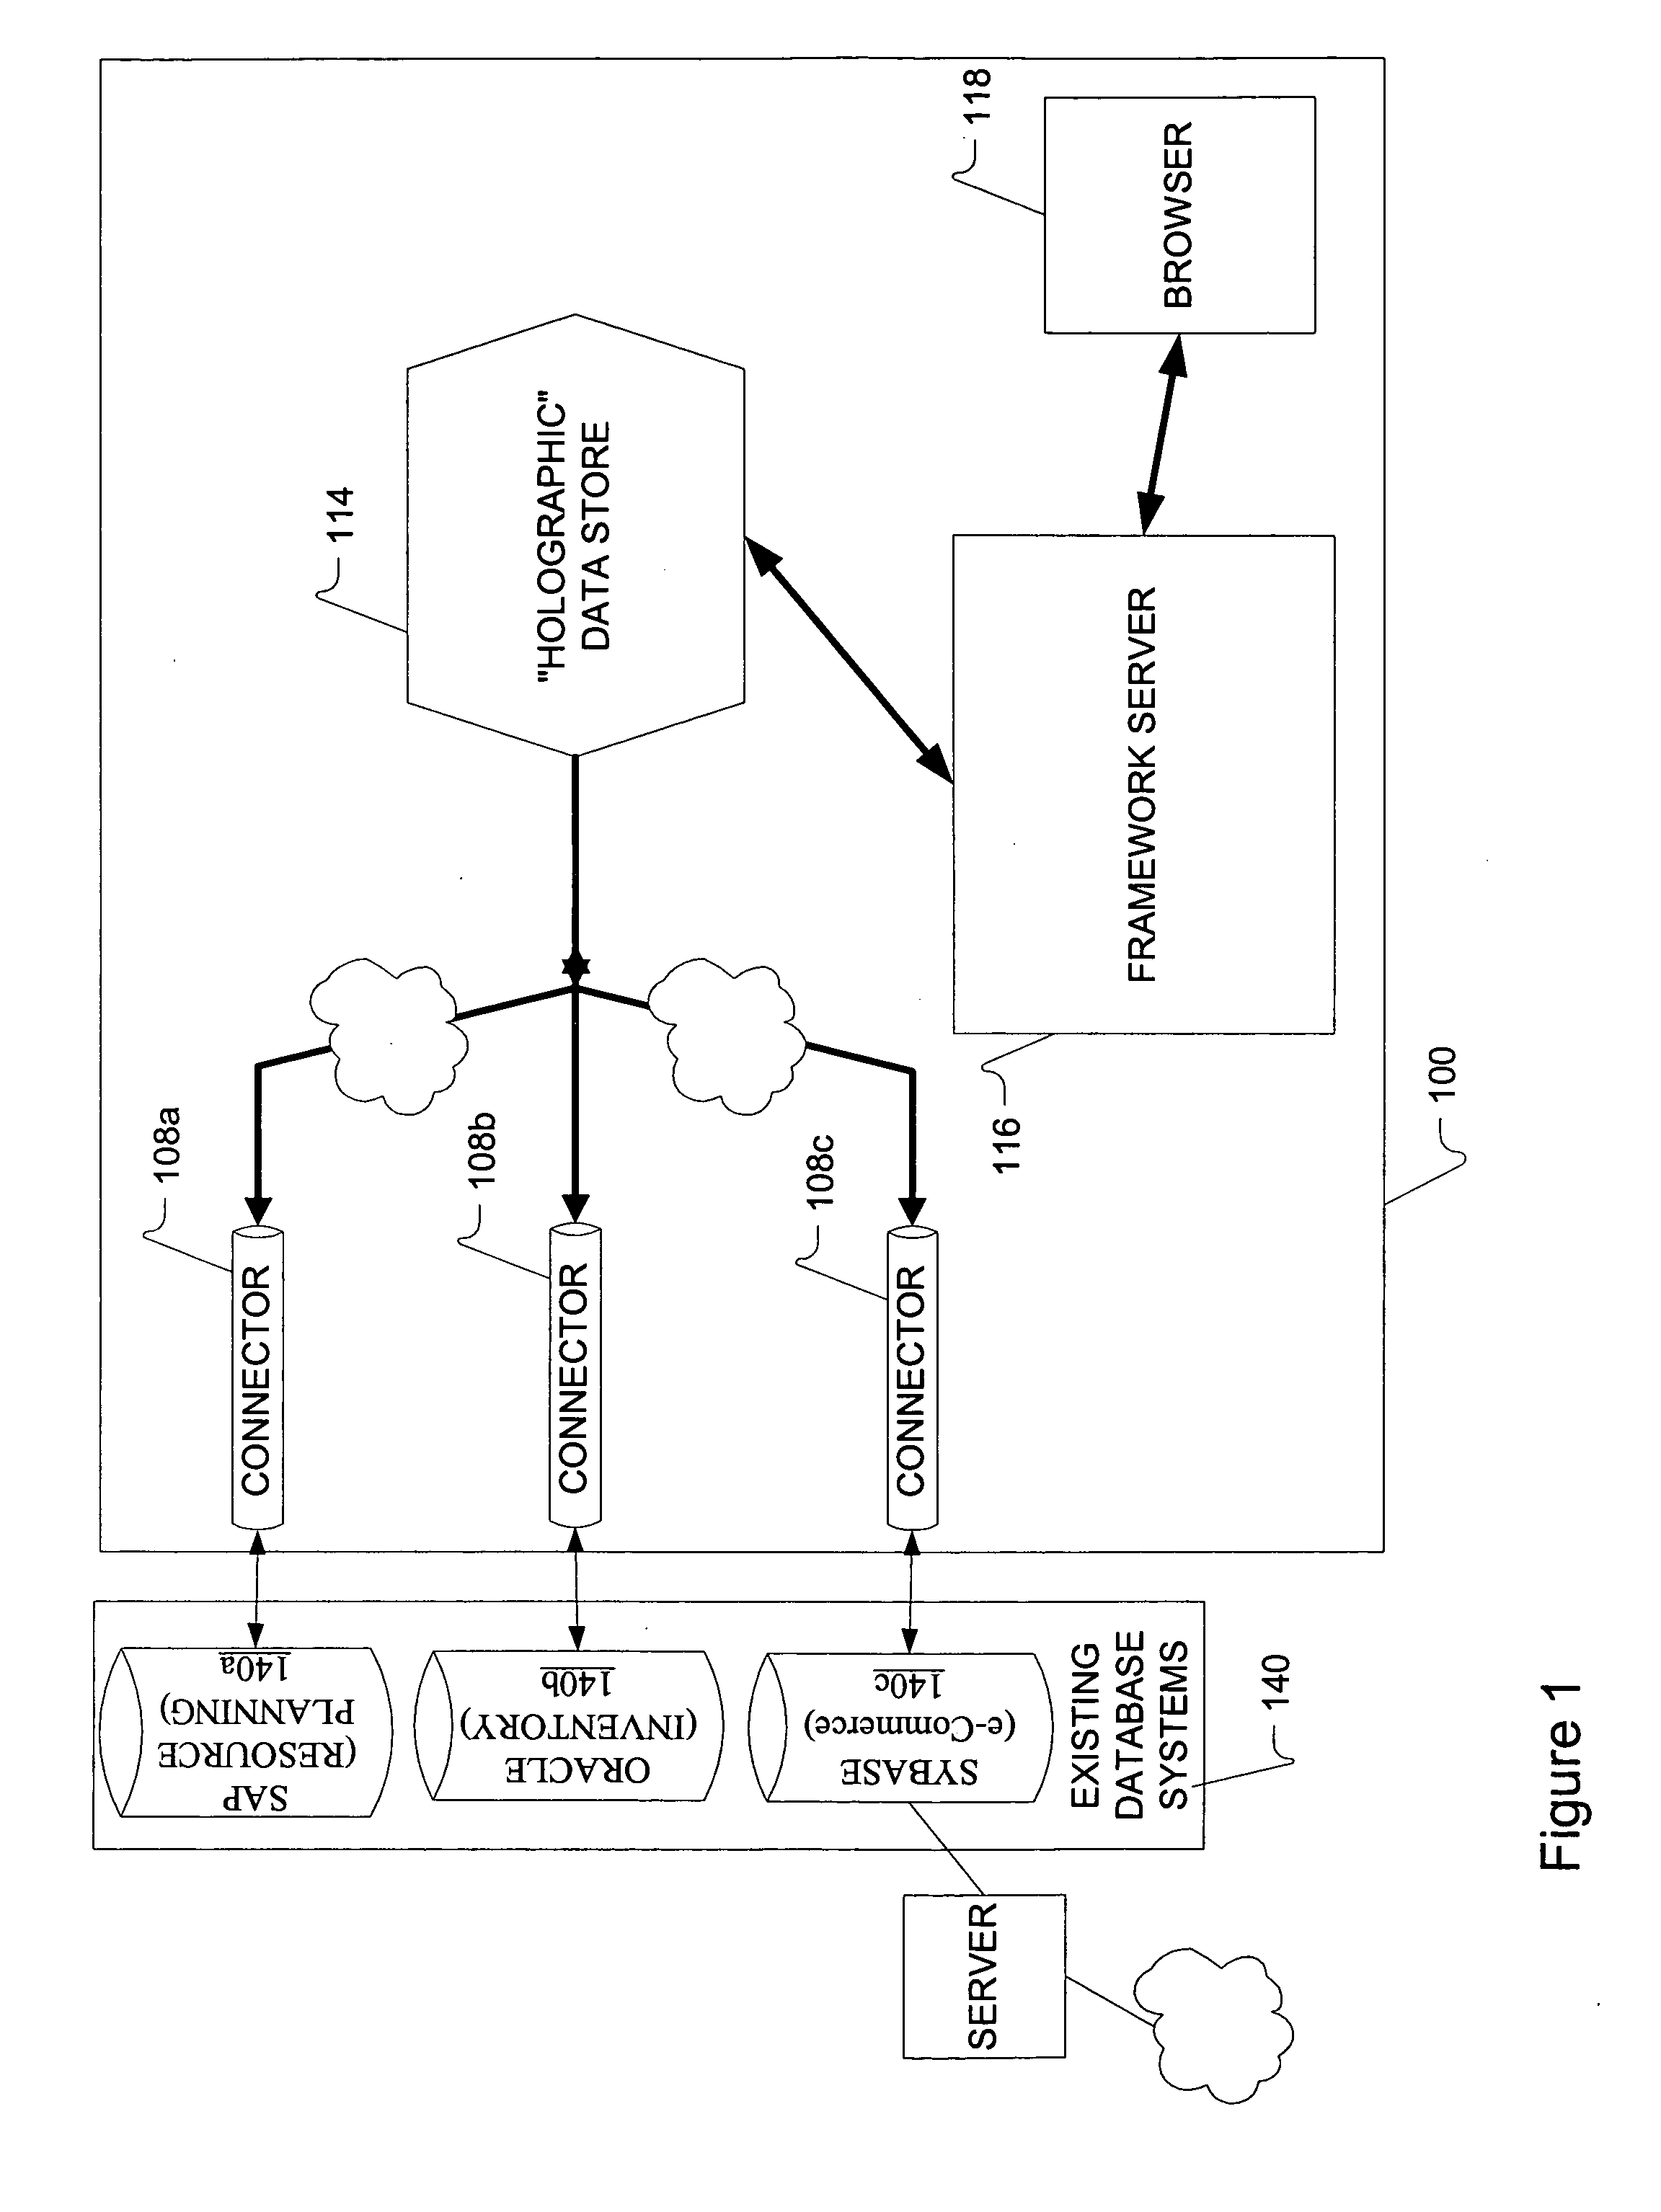 Methods and apparatus for real-time business visibility using persistent schema-less data storage